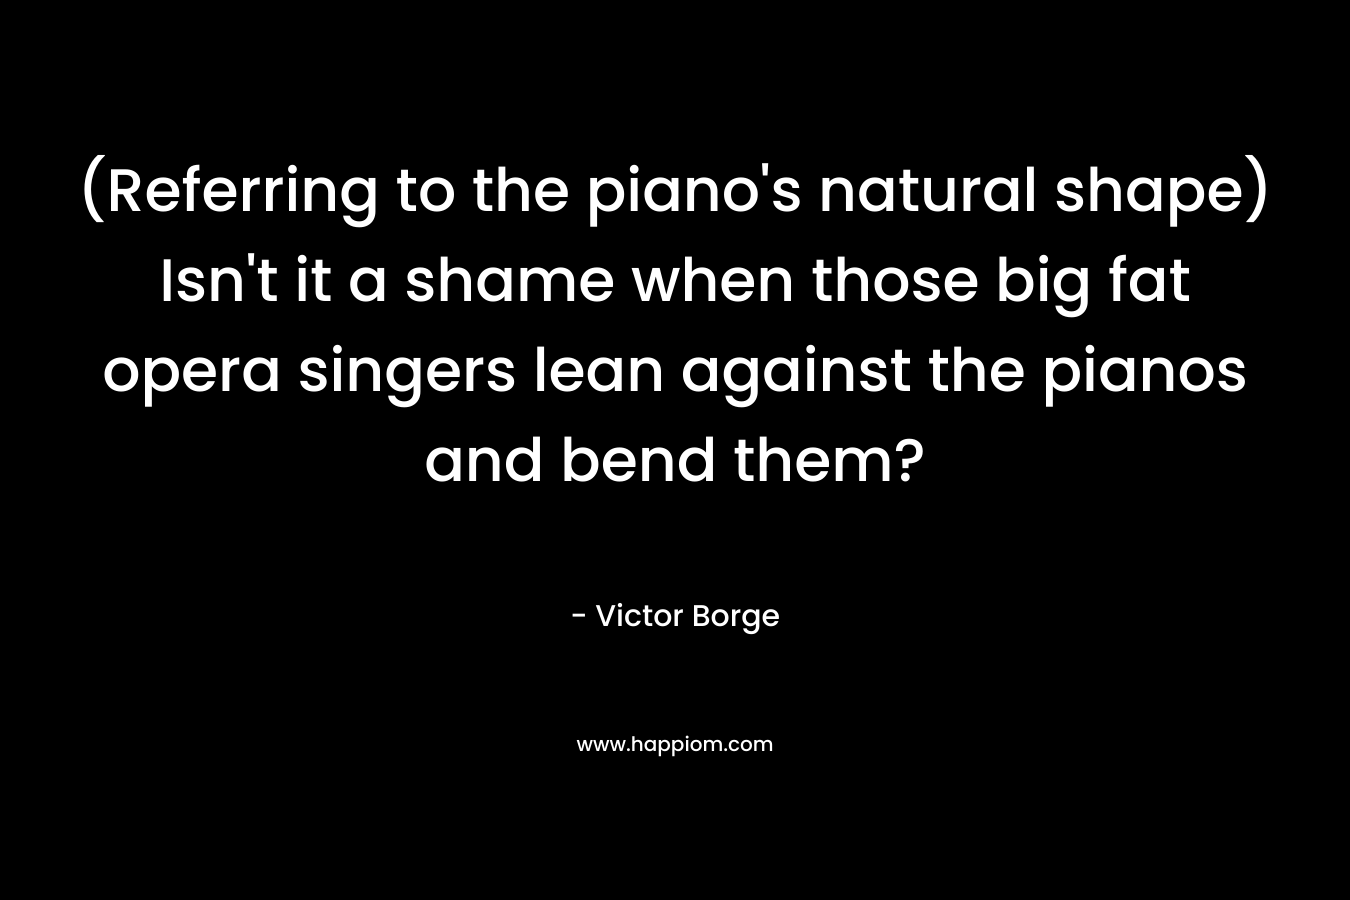 (Referring to the piano’s natural shape) Isn’t it a shame when those big fat opera singers lean against the pianos and bend them? – Victor Borge